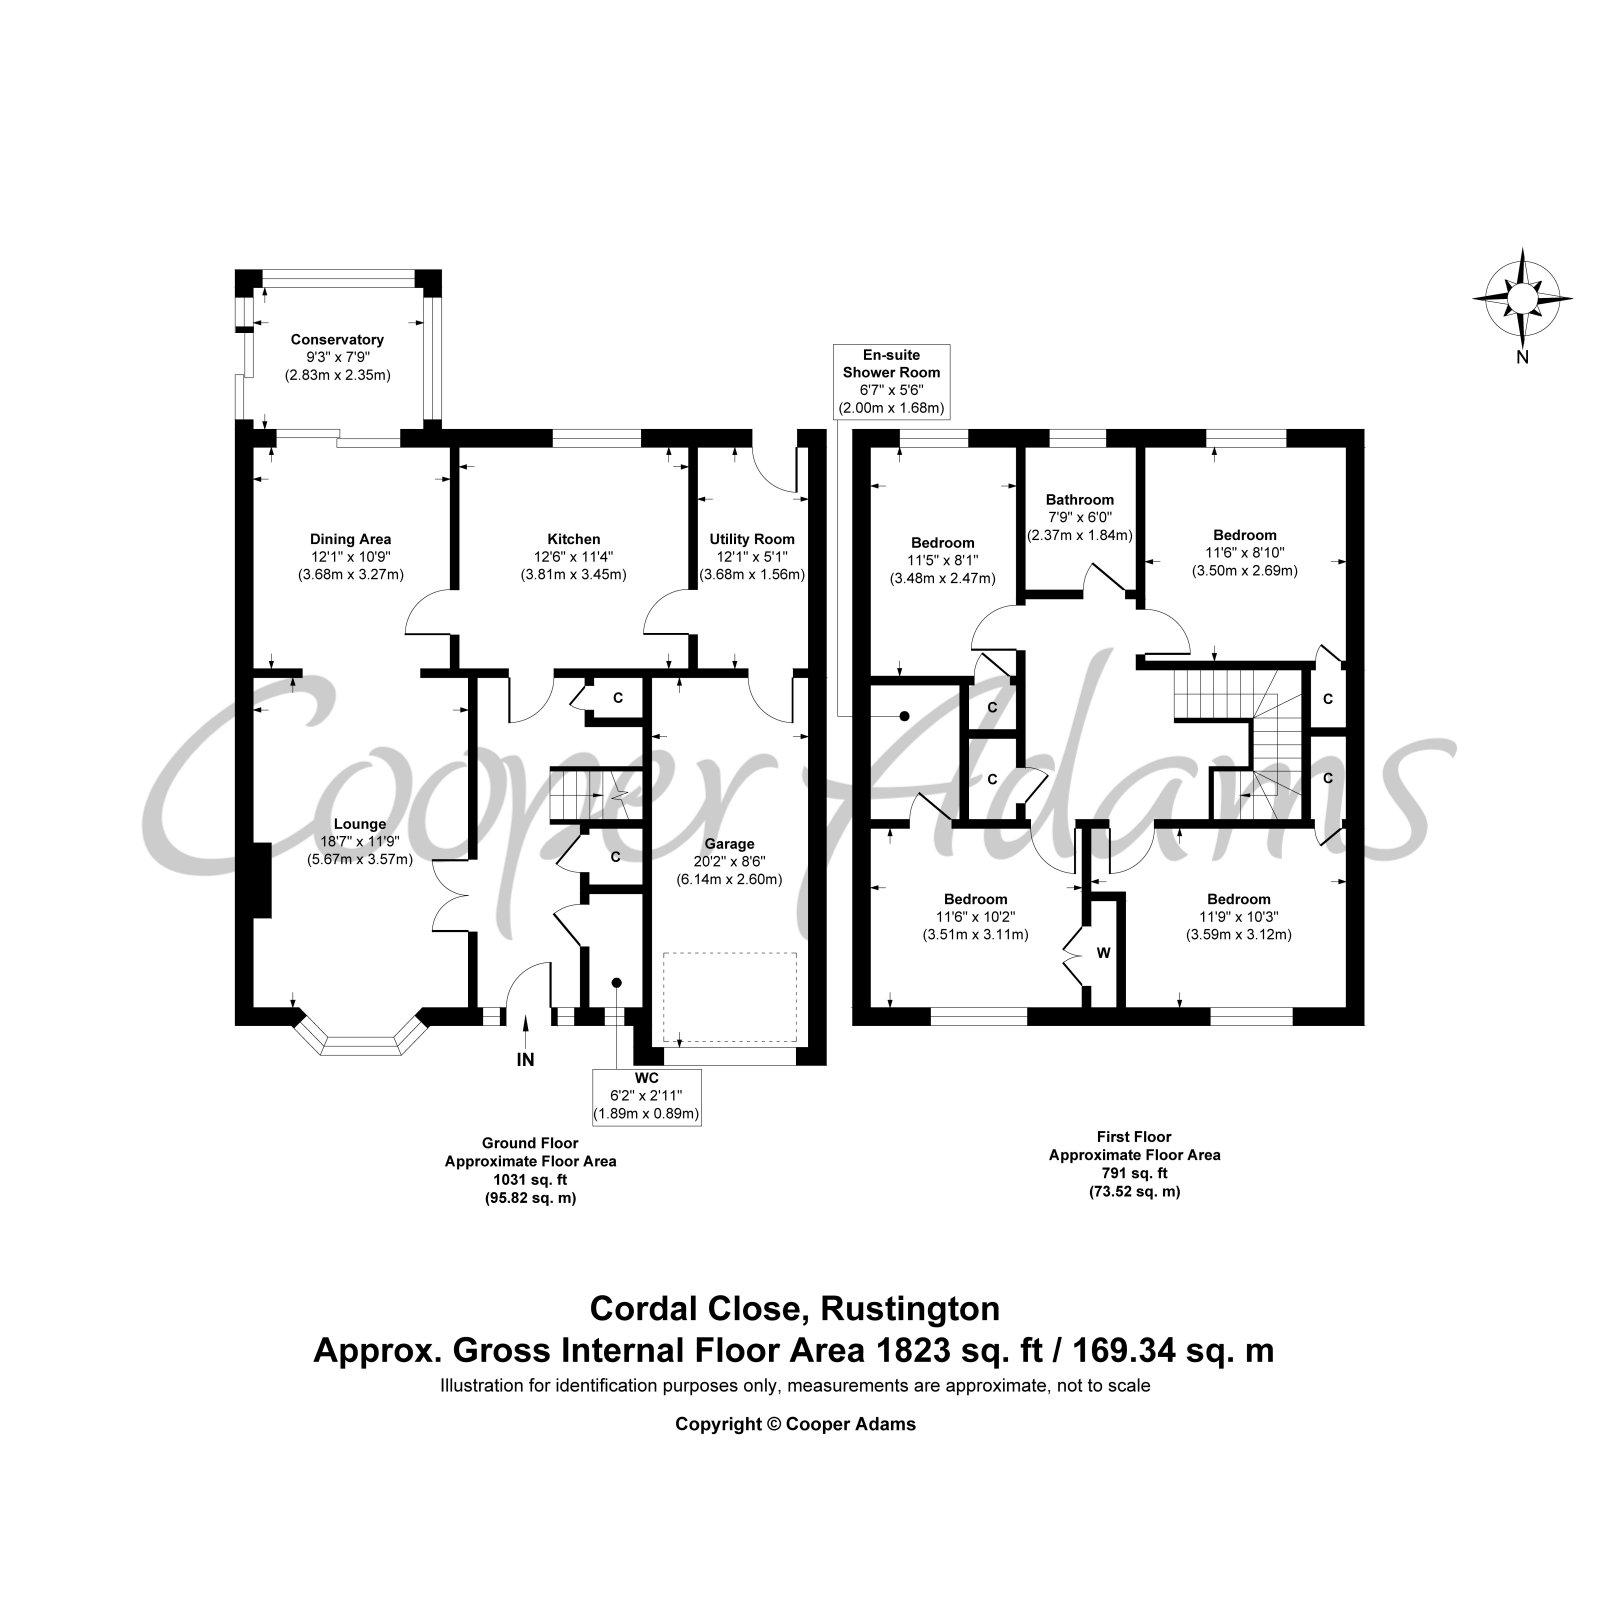 4 bed house for sale in Cordal Close, Rustington - Property floorplan